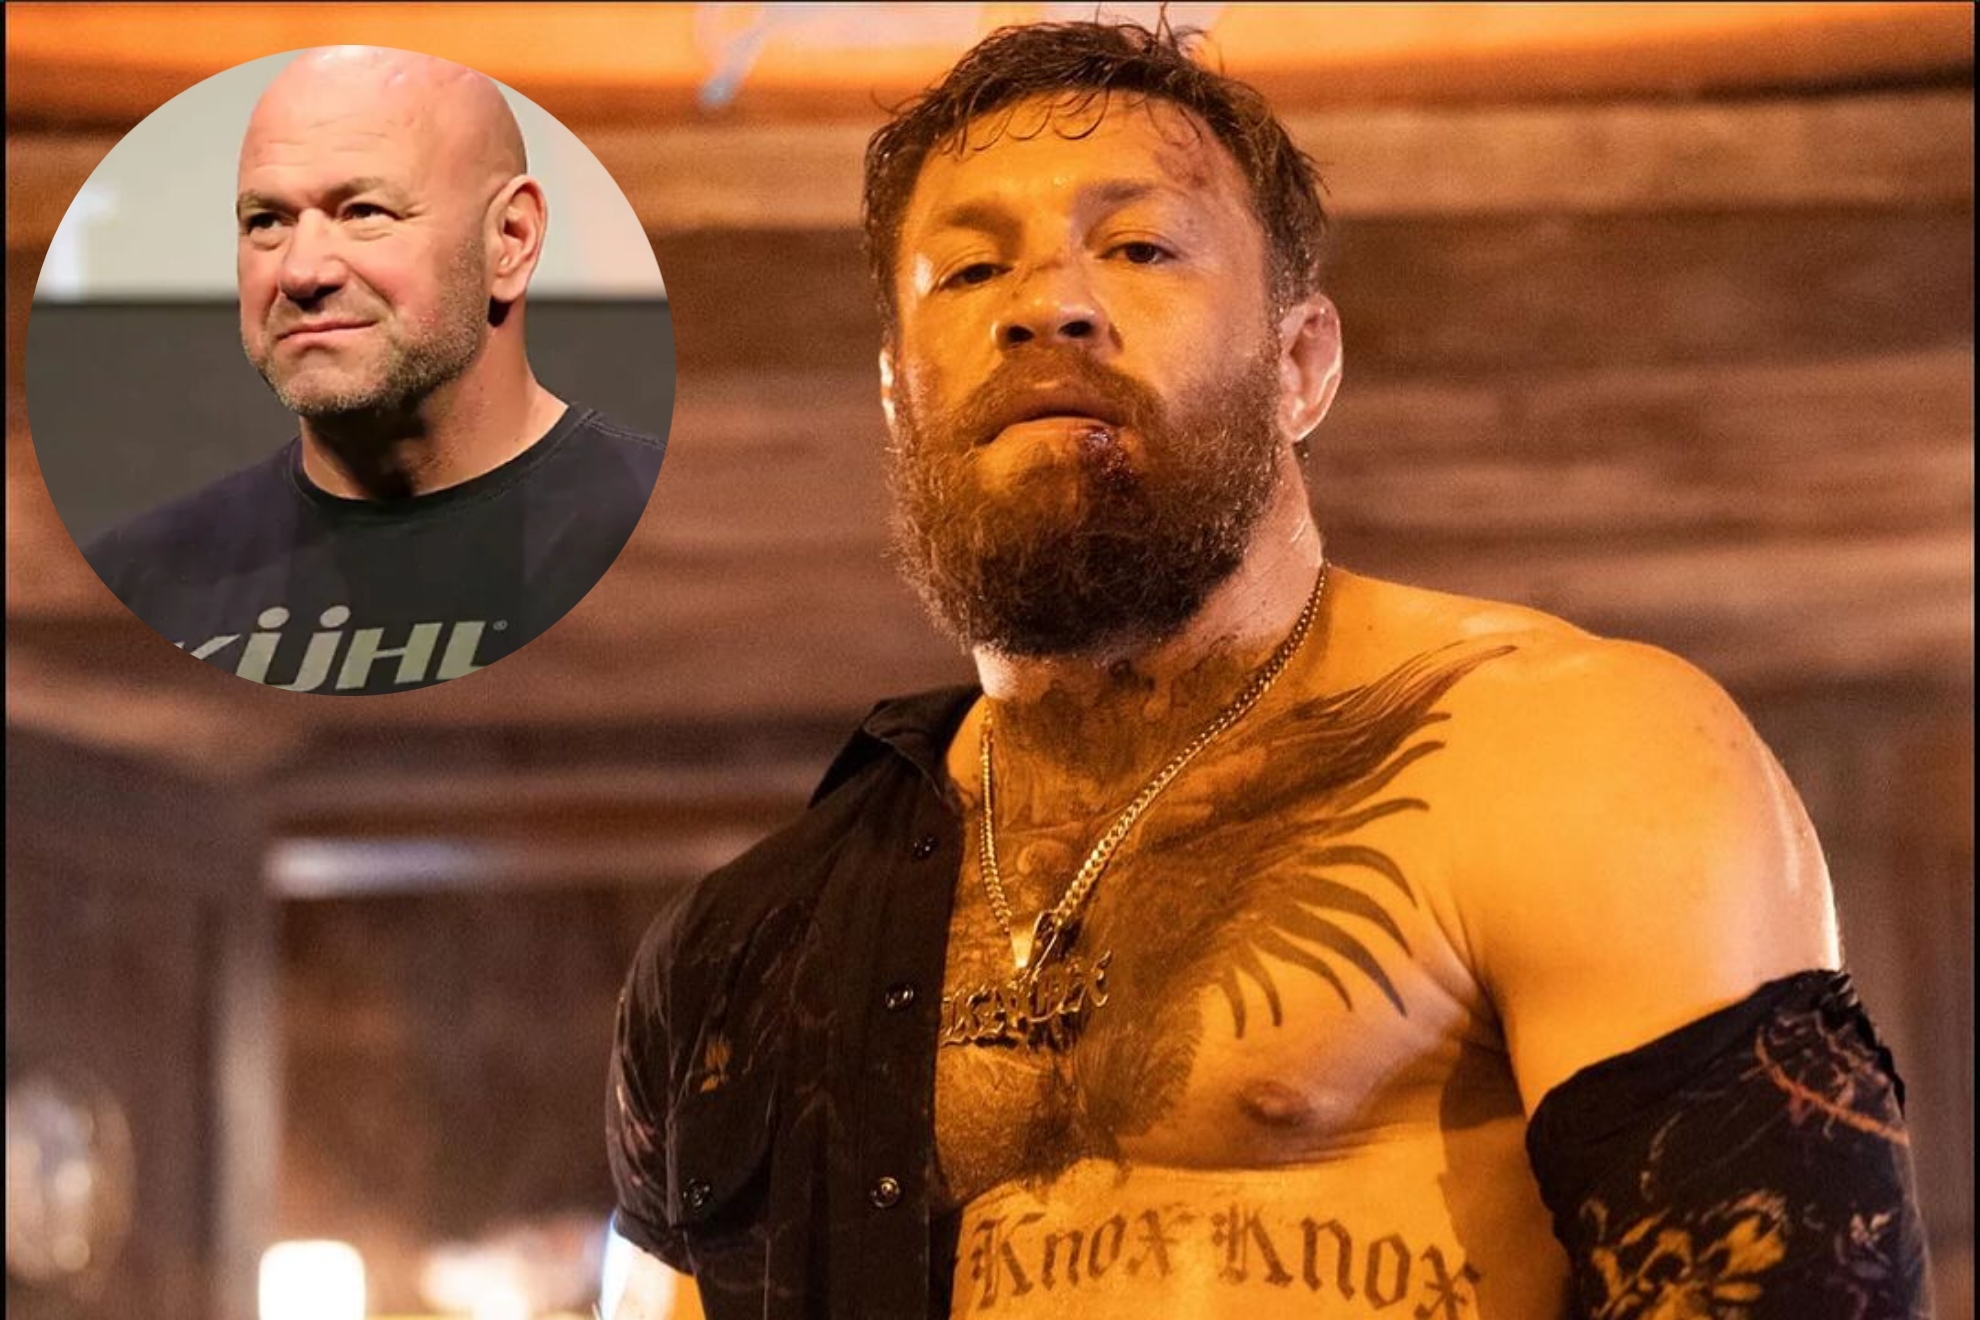 Conor McGregor (promotional image from the film Road House) and Dana White.